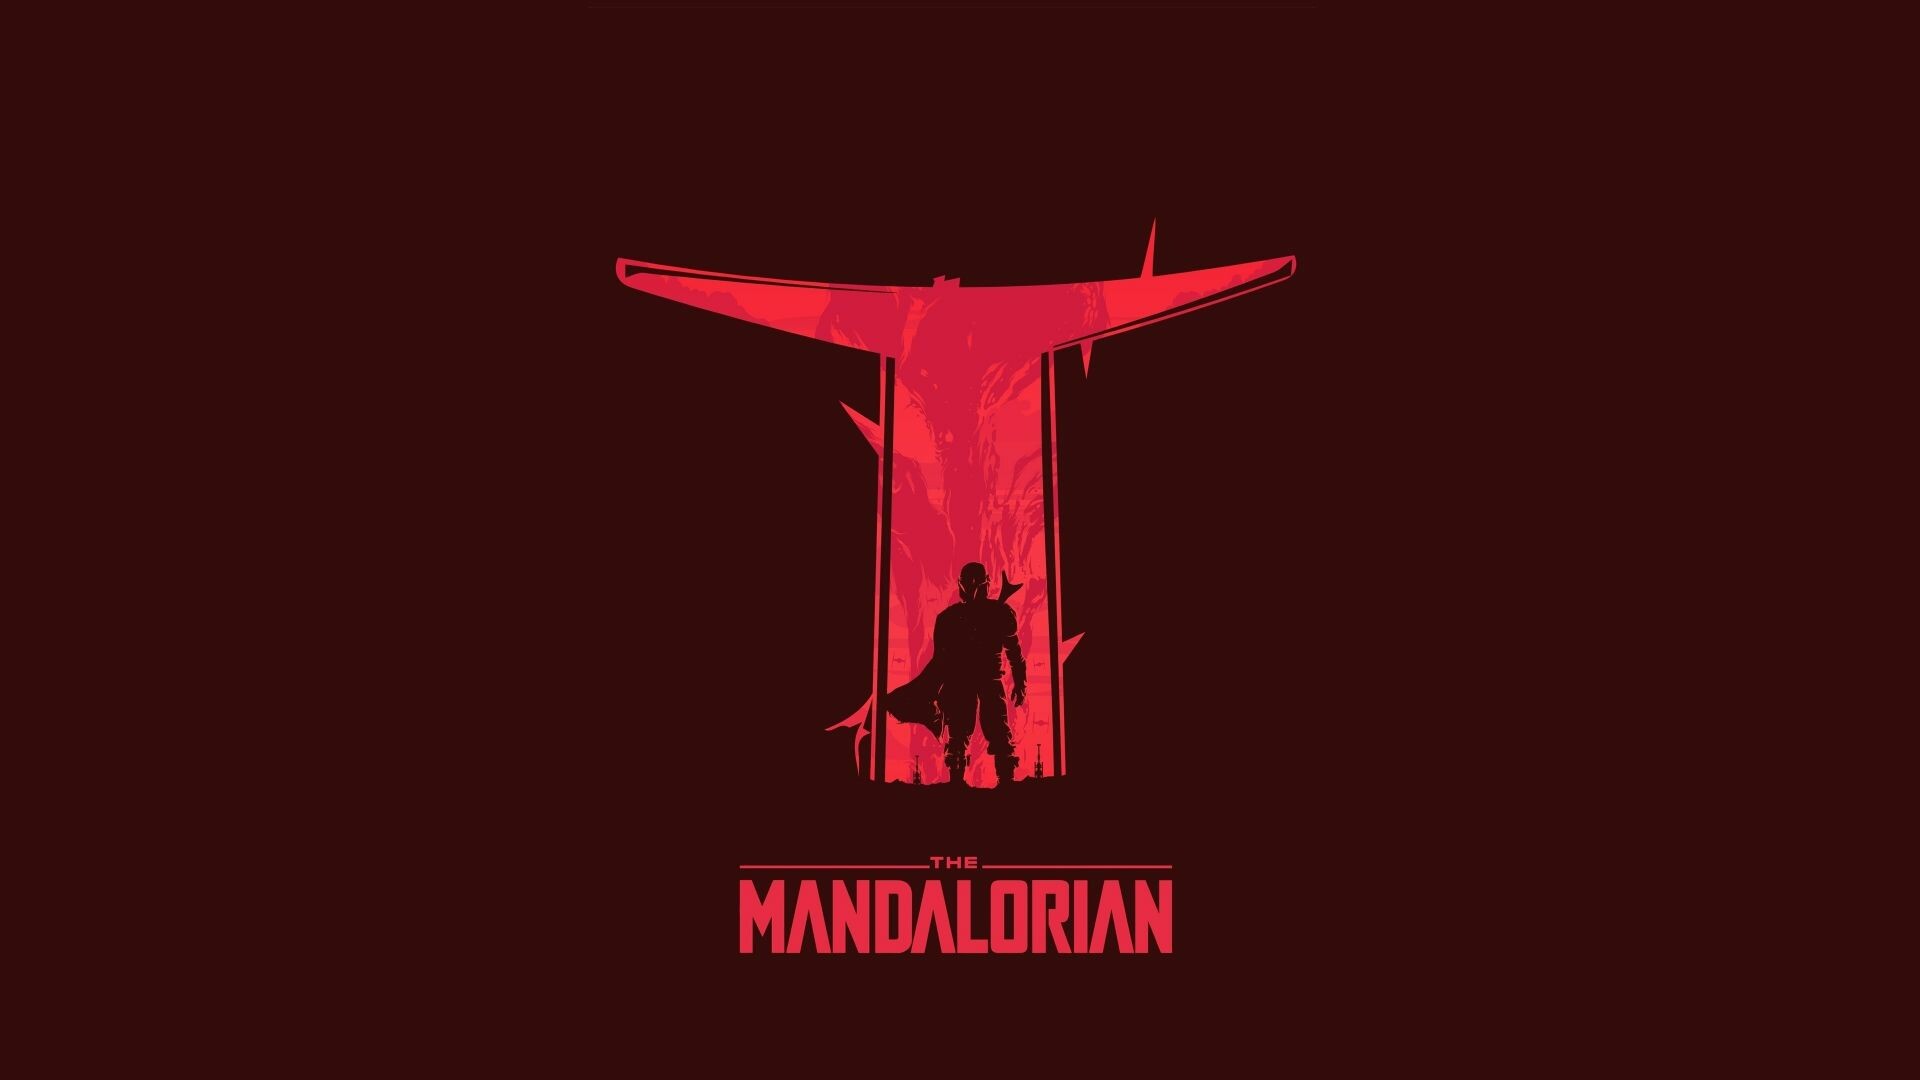 The Mandalorian: Minimal, TV show, 2020, Poster, Space Western. 1920x1080 Full HD Background.